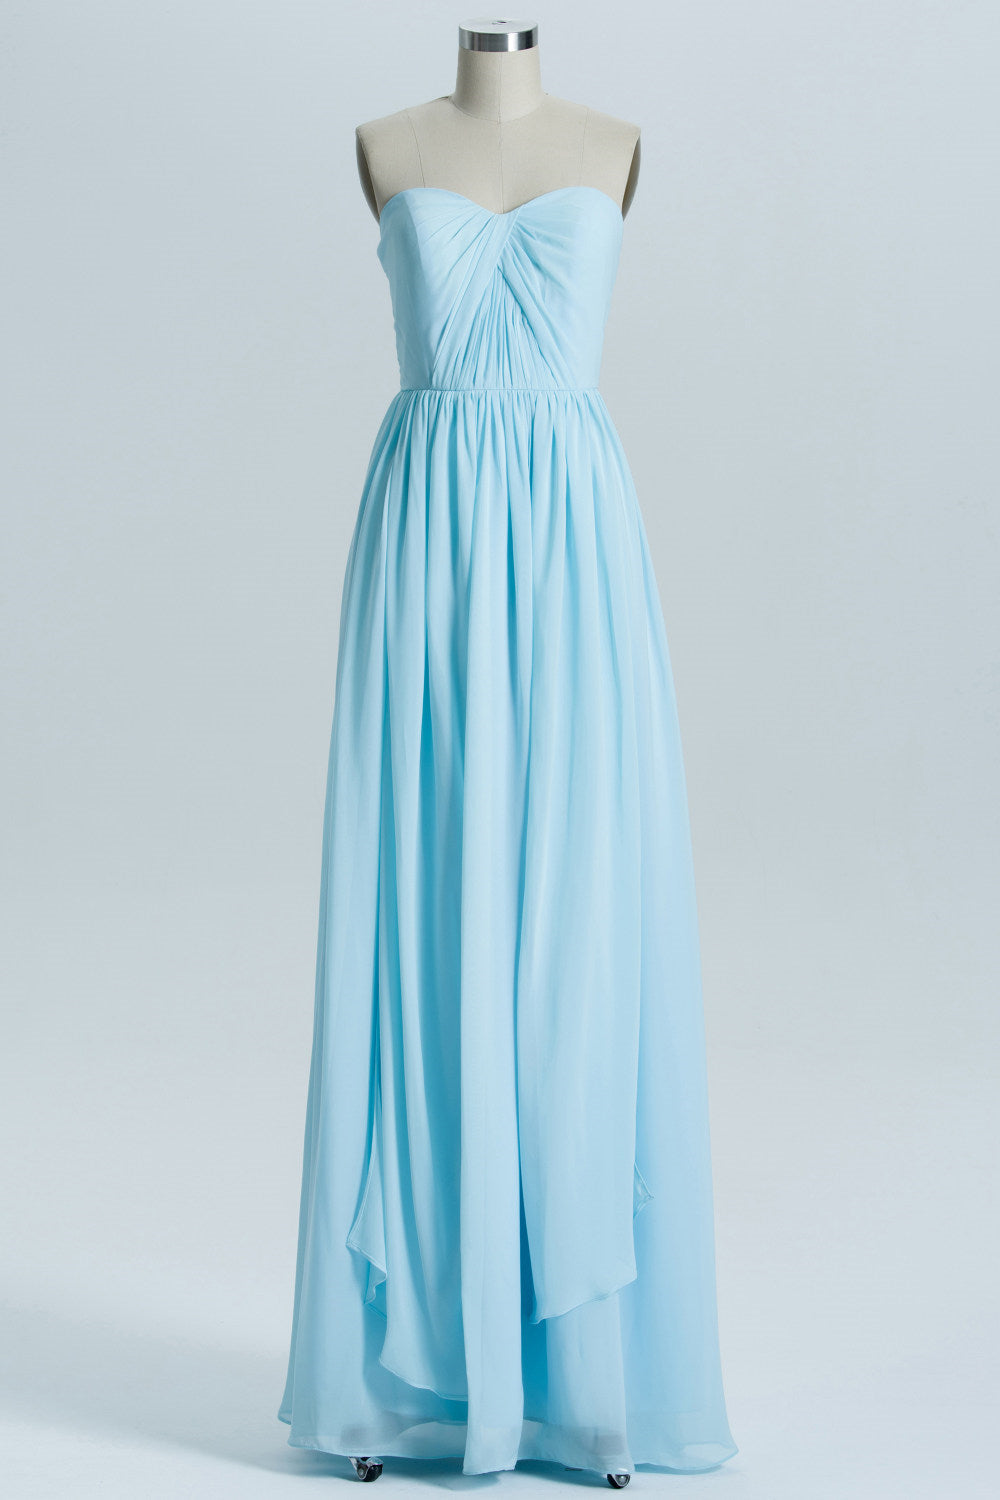 Prom Dresses For Short People, Blue Chiffon A-line Long Convertible Bridesmaid Dress